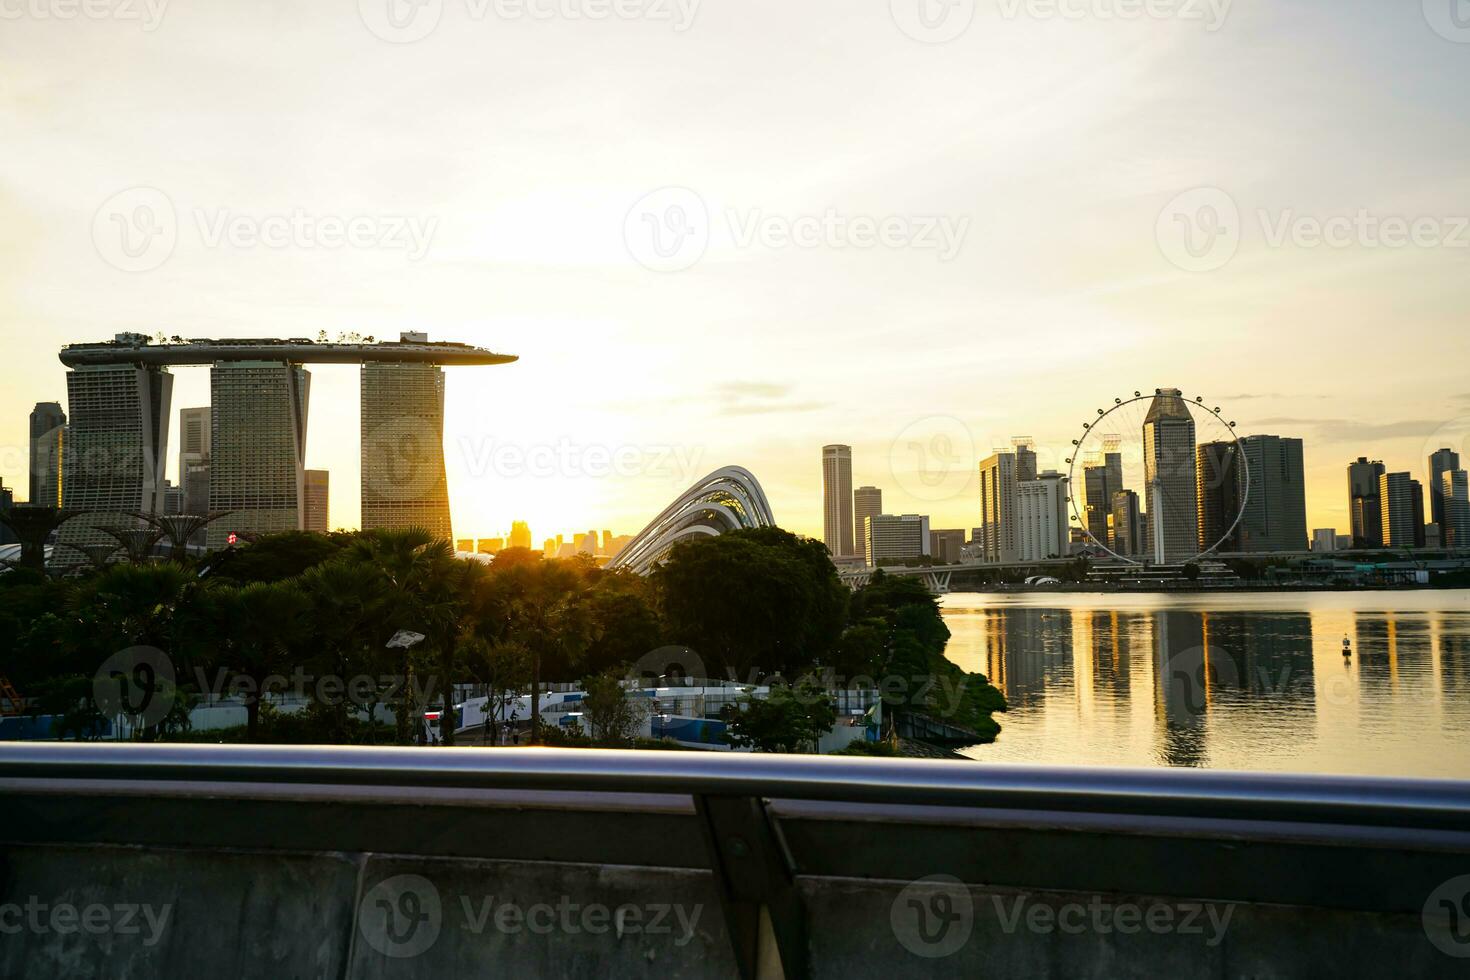 Marina Bay Sands is a large integrated resort. Located at Marina Bay Singapore It is the most expensive casino building in the world. photo